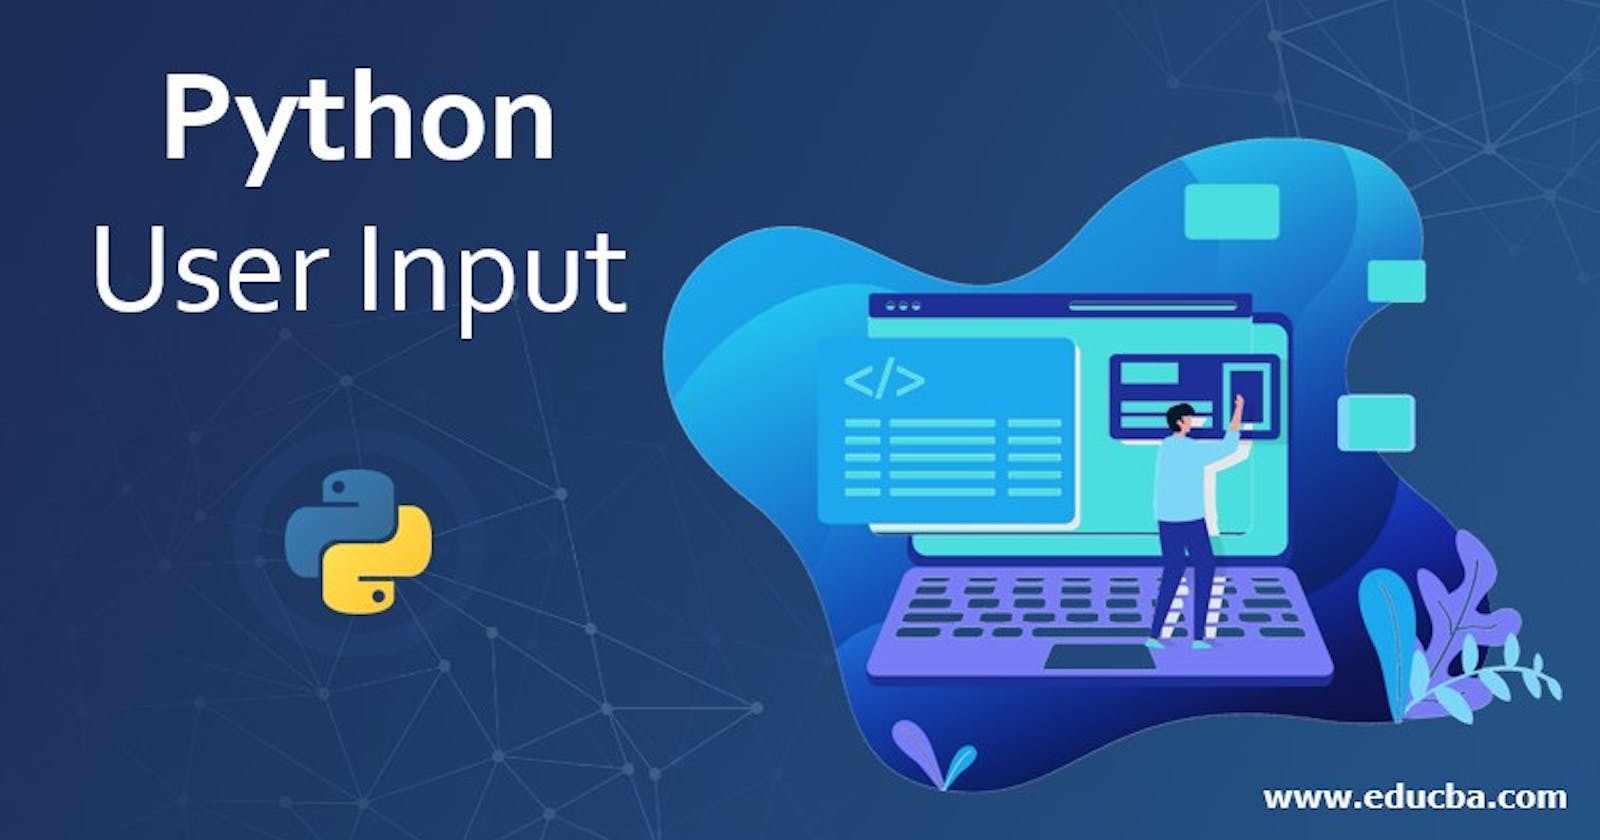 Learn to use and interpret input from the user - Python